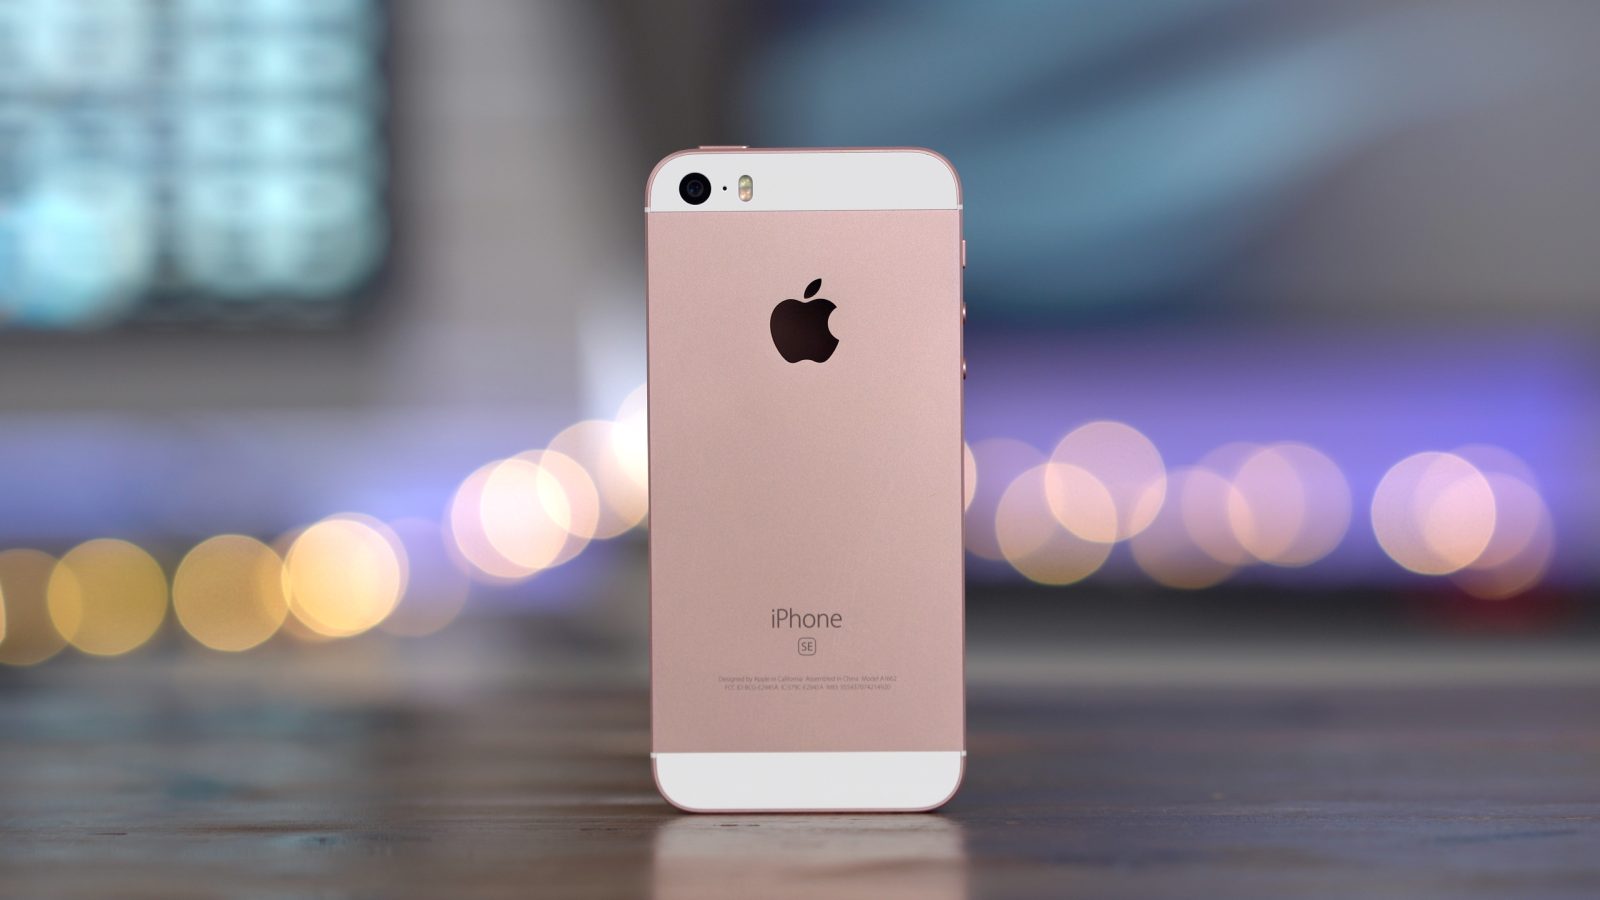 apple-store-leak-confirms-iphone-se-is-new-low-cost-iphone